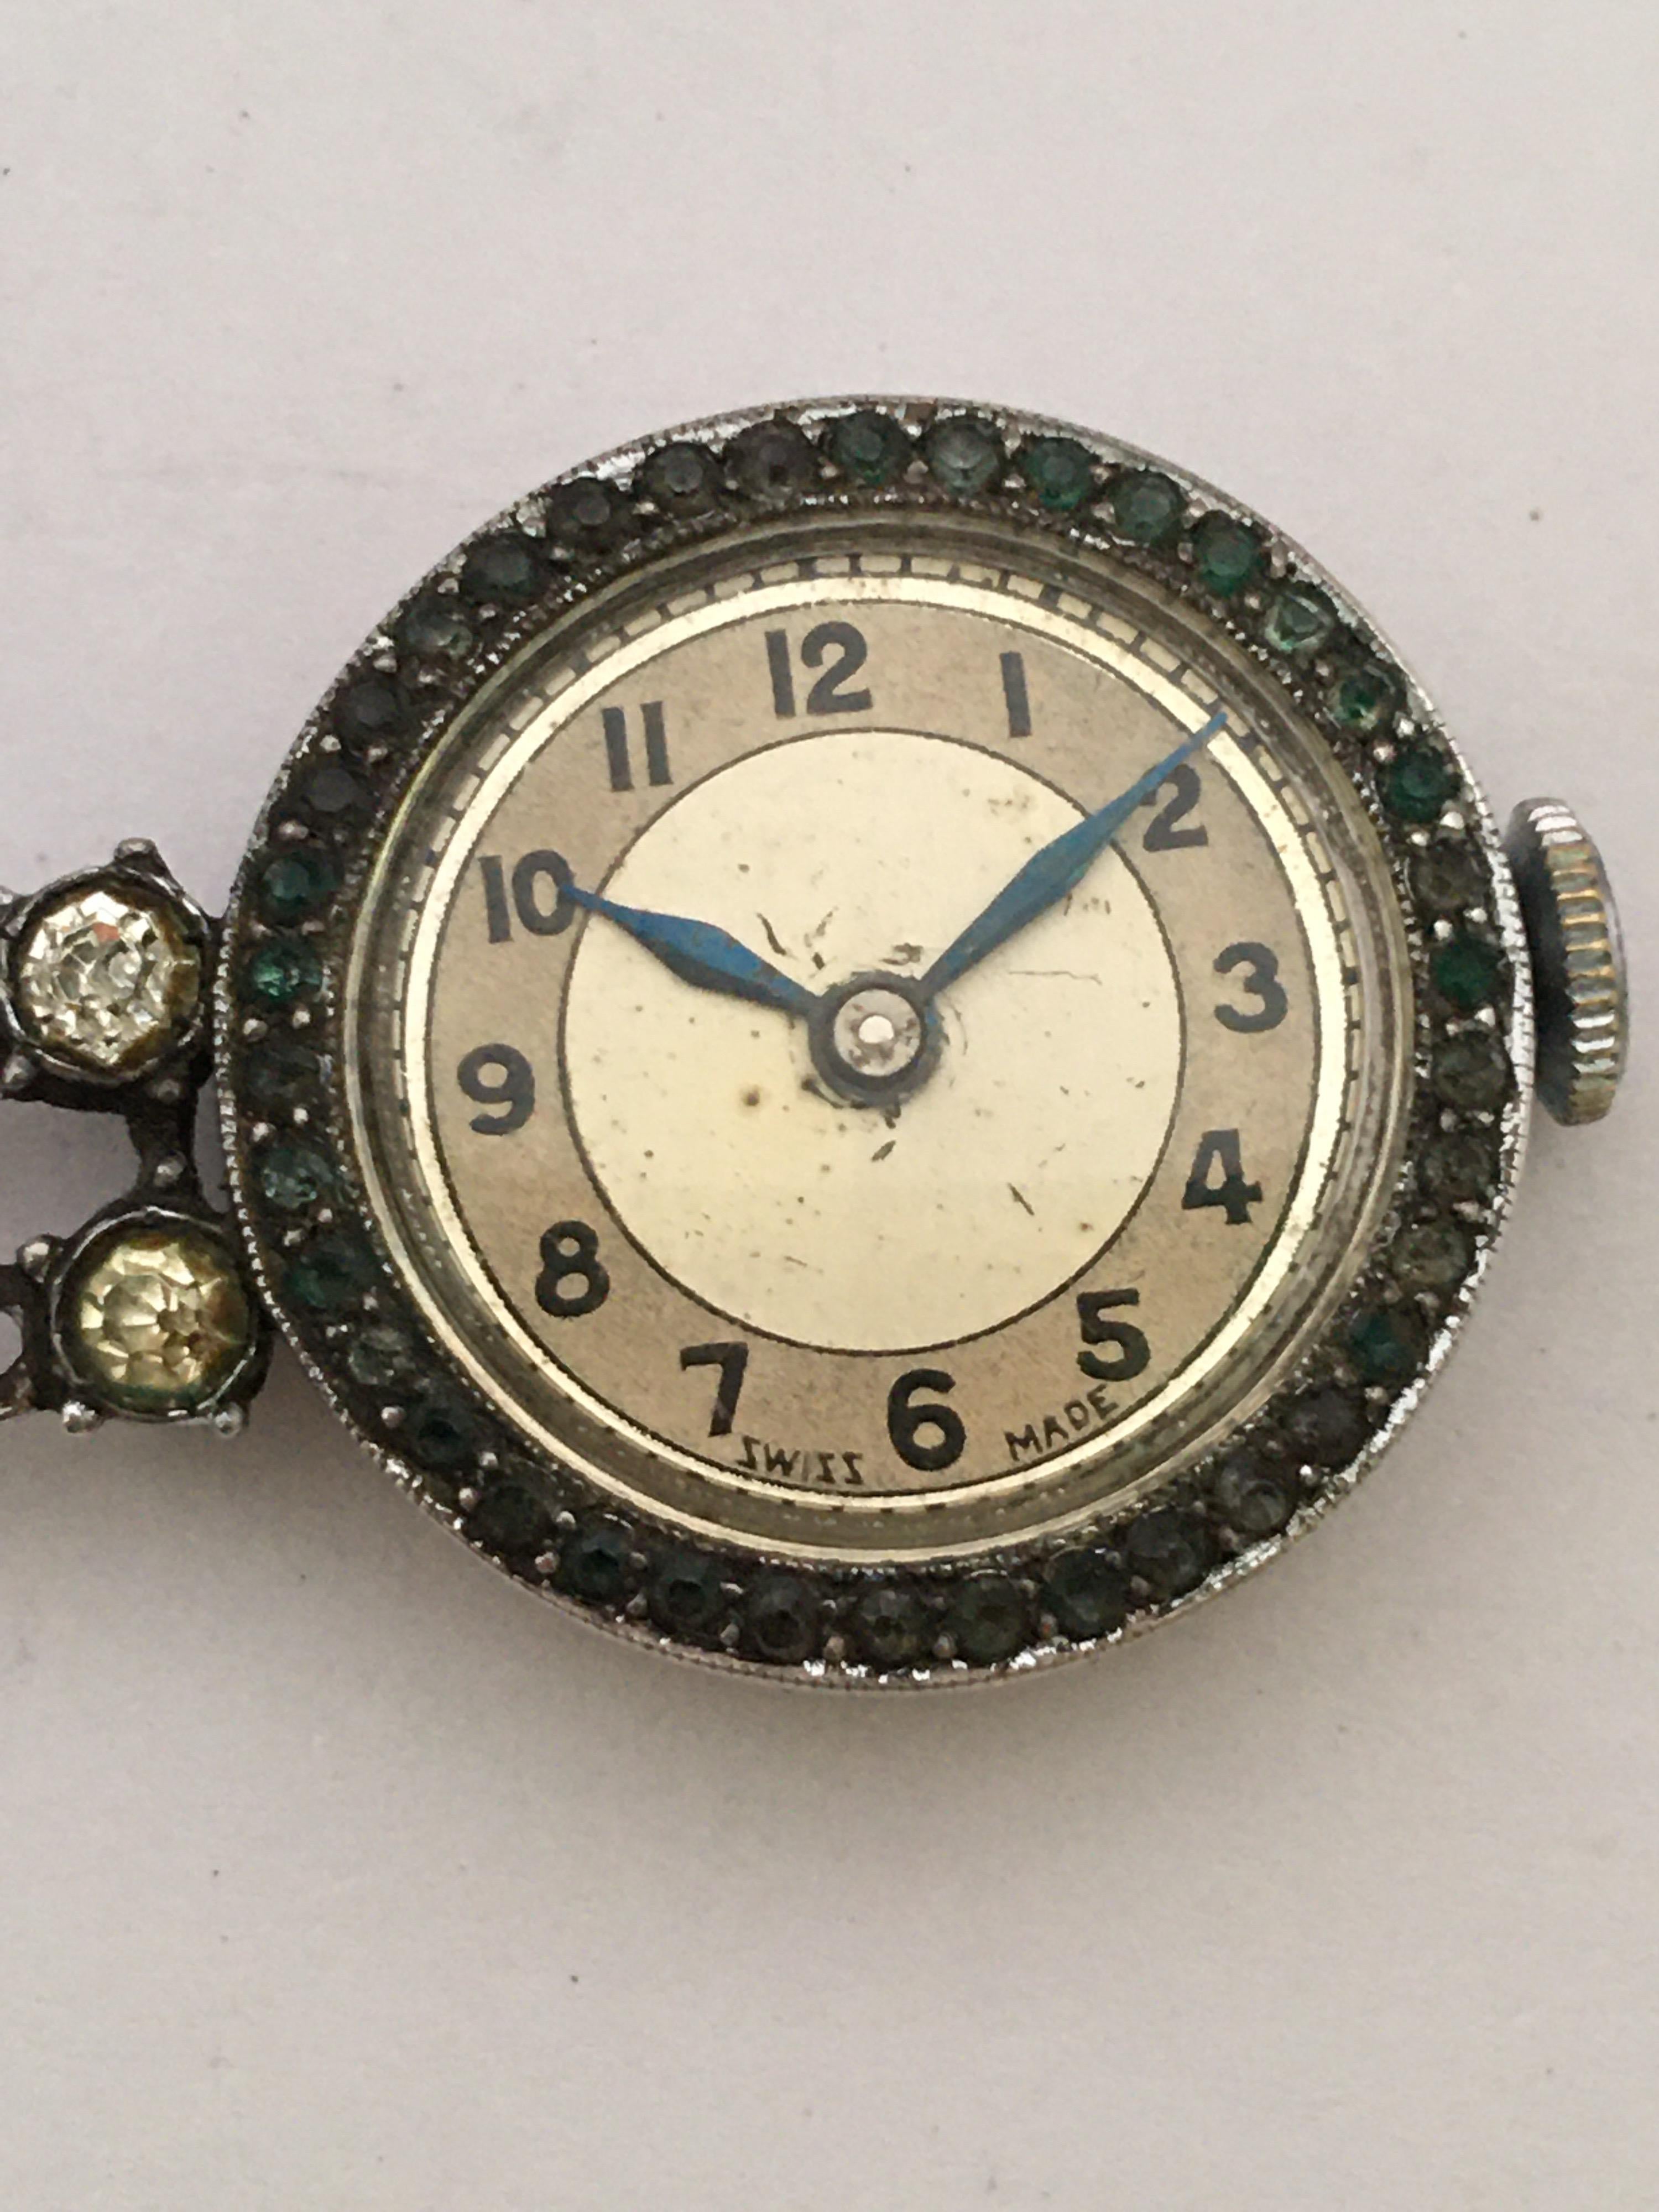 Vintage 1930s Silver Plated Mechanical Nurse’s Watch 2